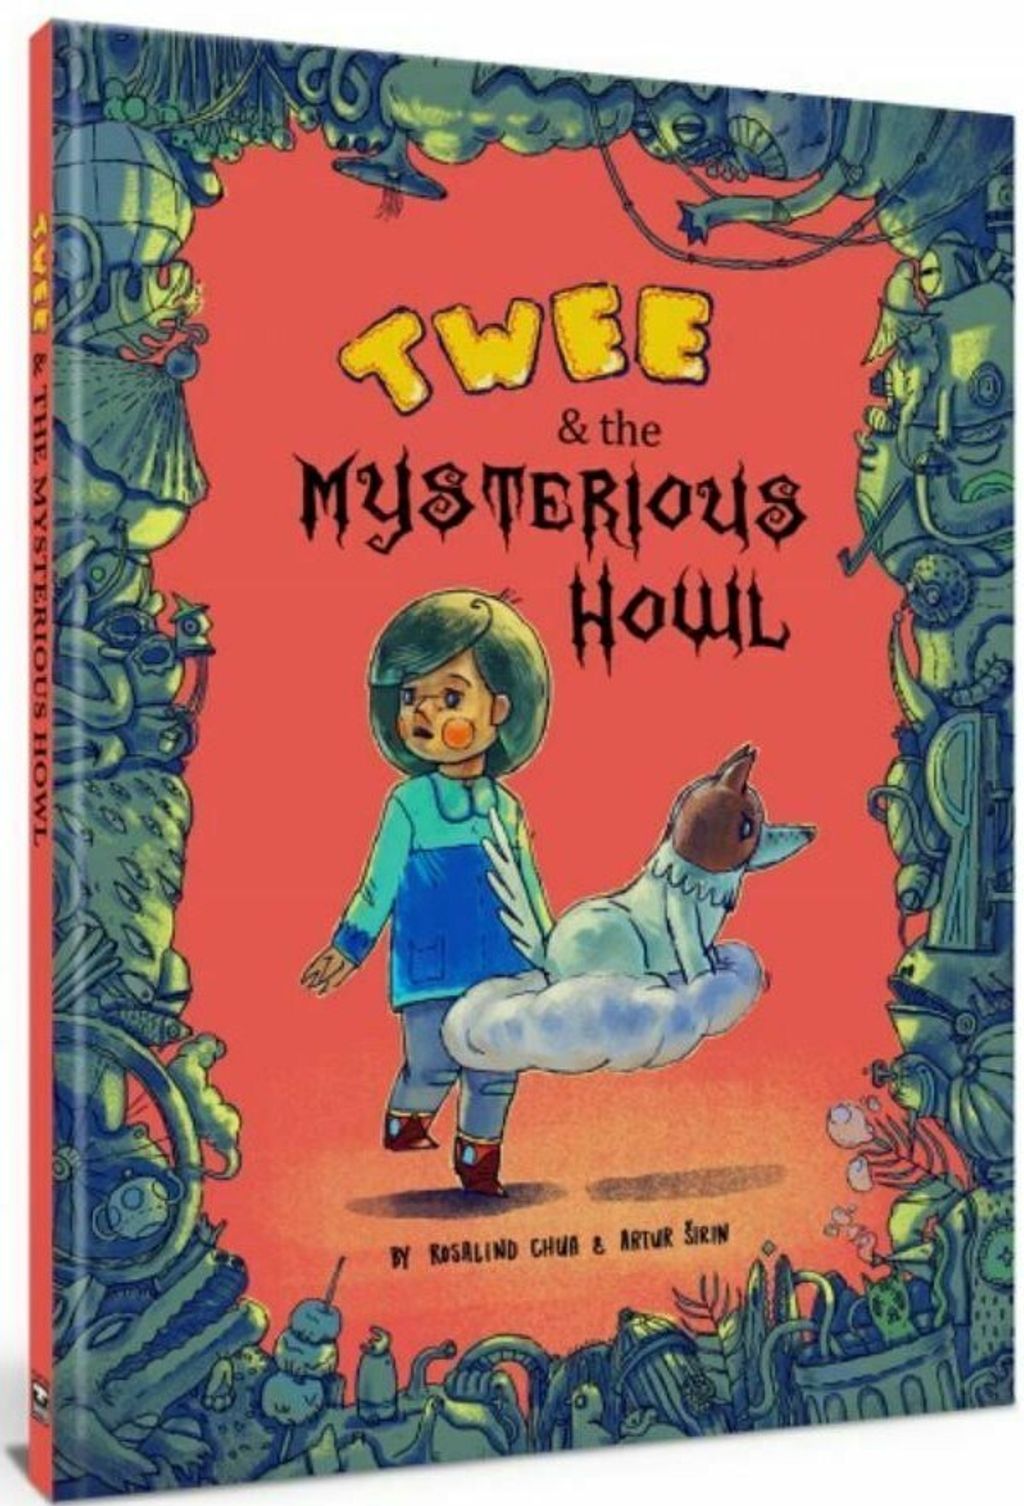 TWEE & THE MYSTERIOUS HOWL